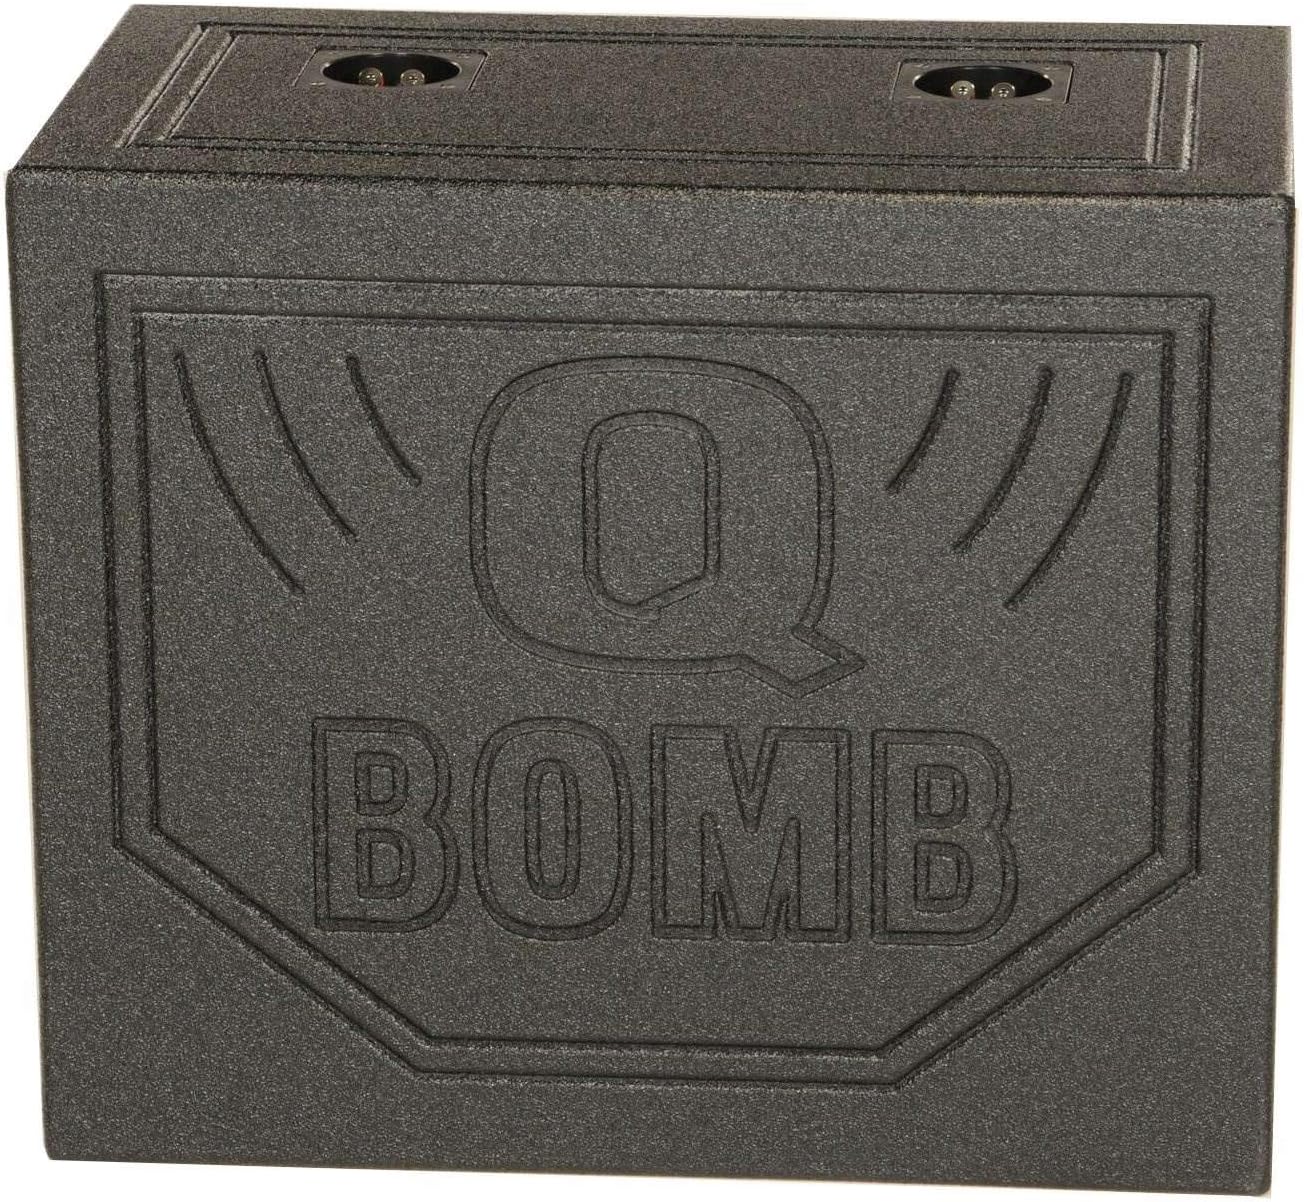 Q Power Dual 10 Inch Vented Triangle Ported Wood Subwoofer Enclosure Box with Durable Bedliner Spray and Spring Loaded Terminals, Black